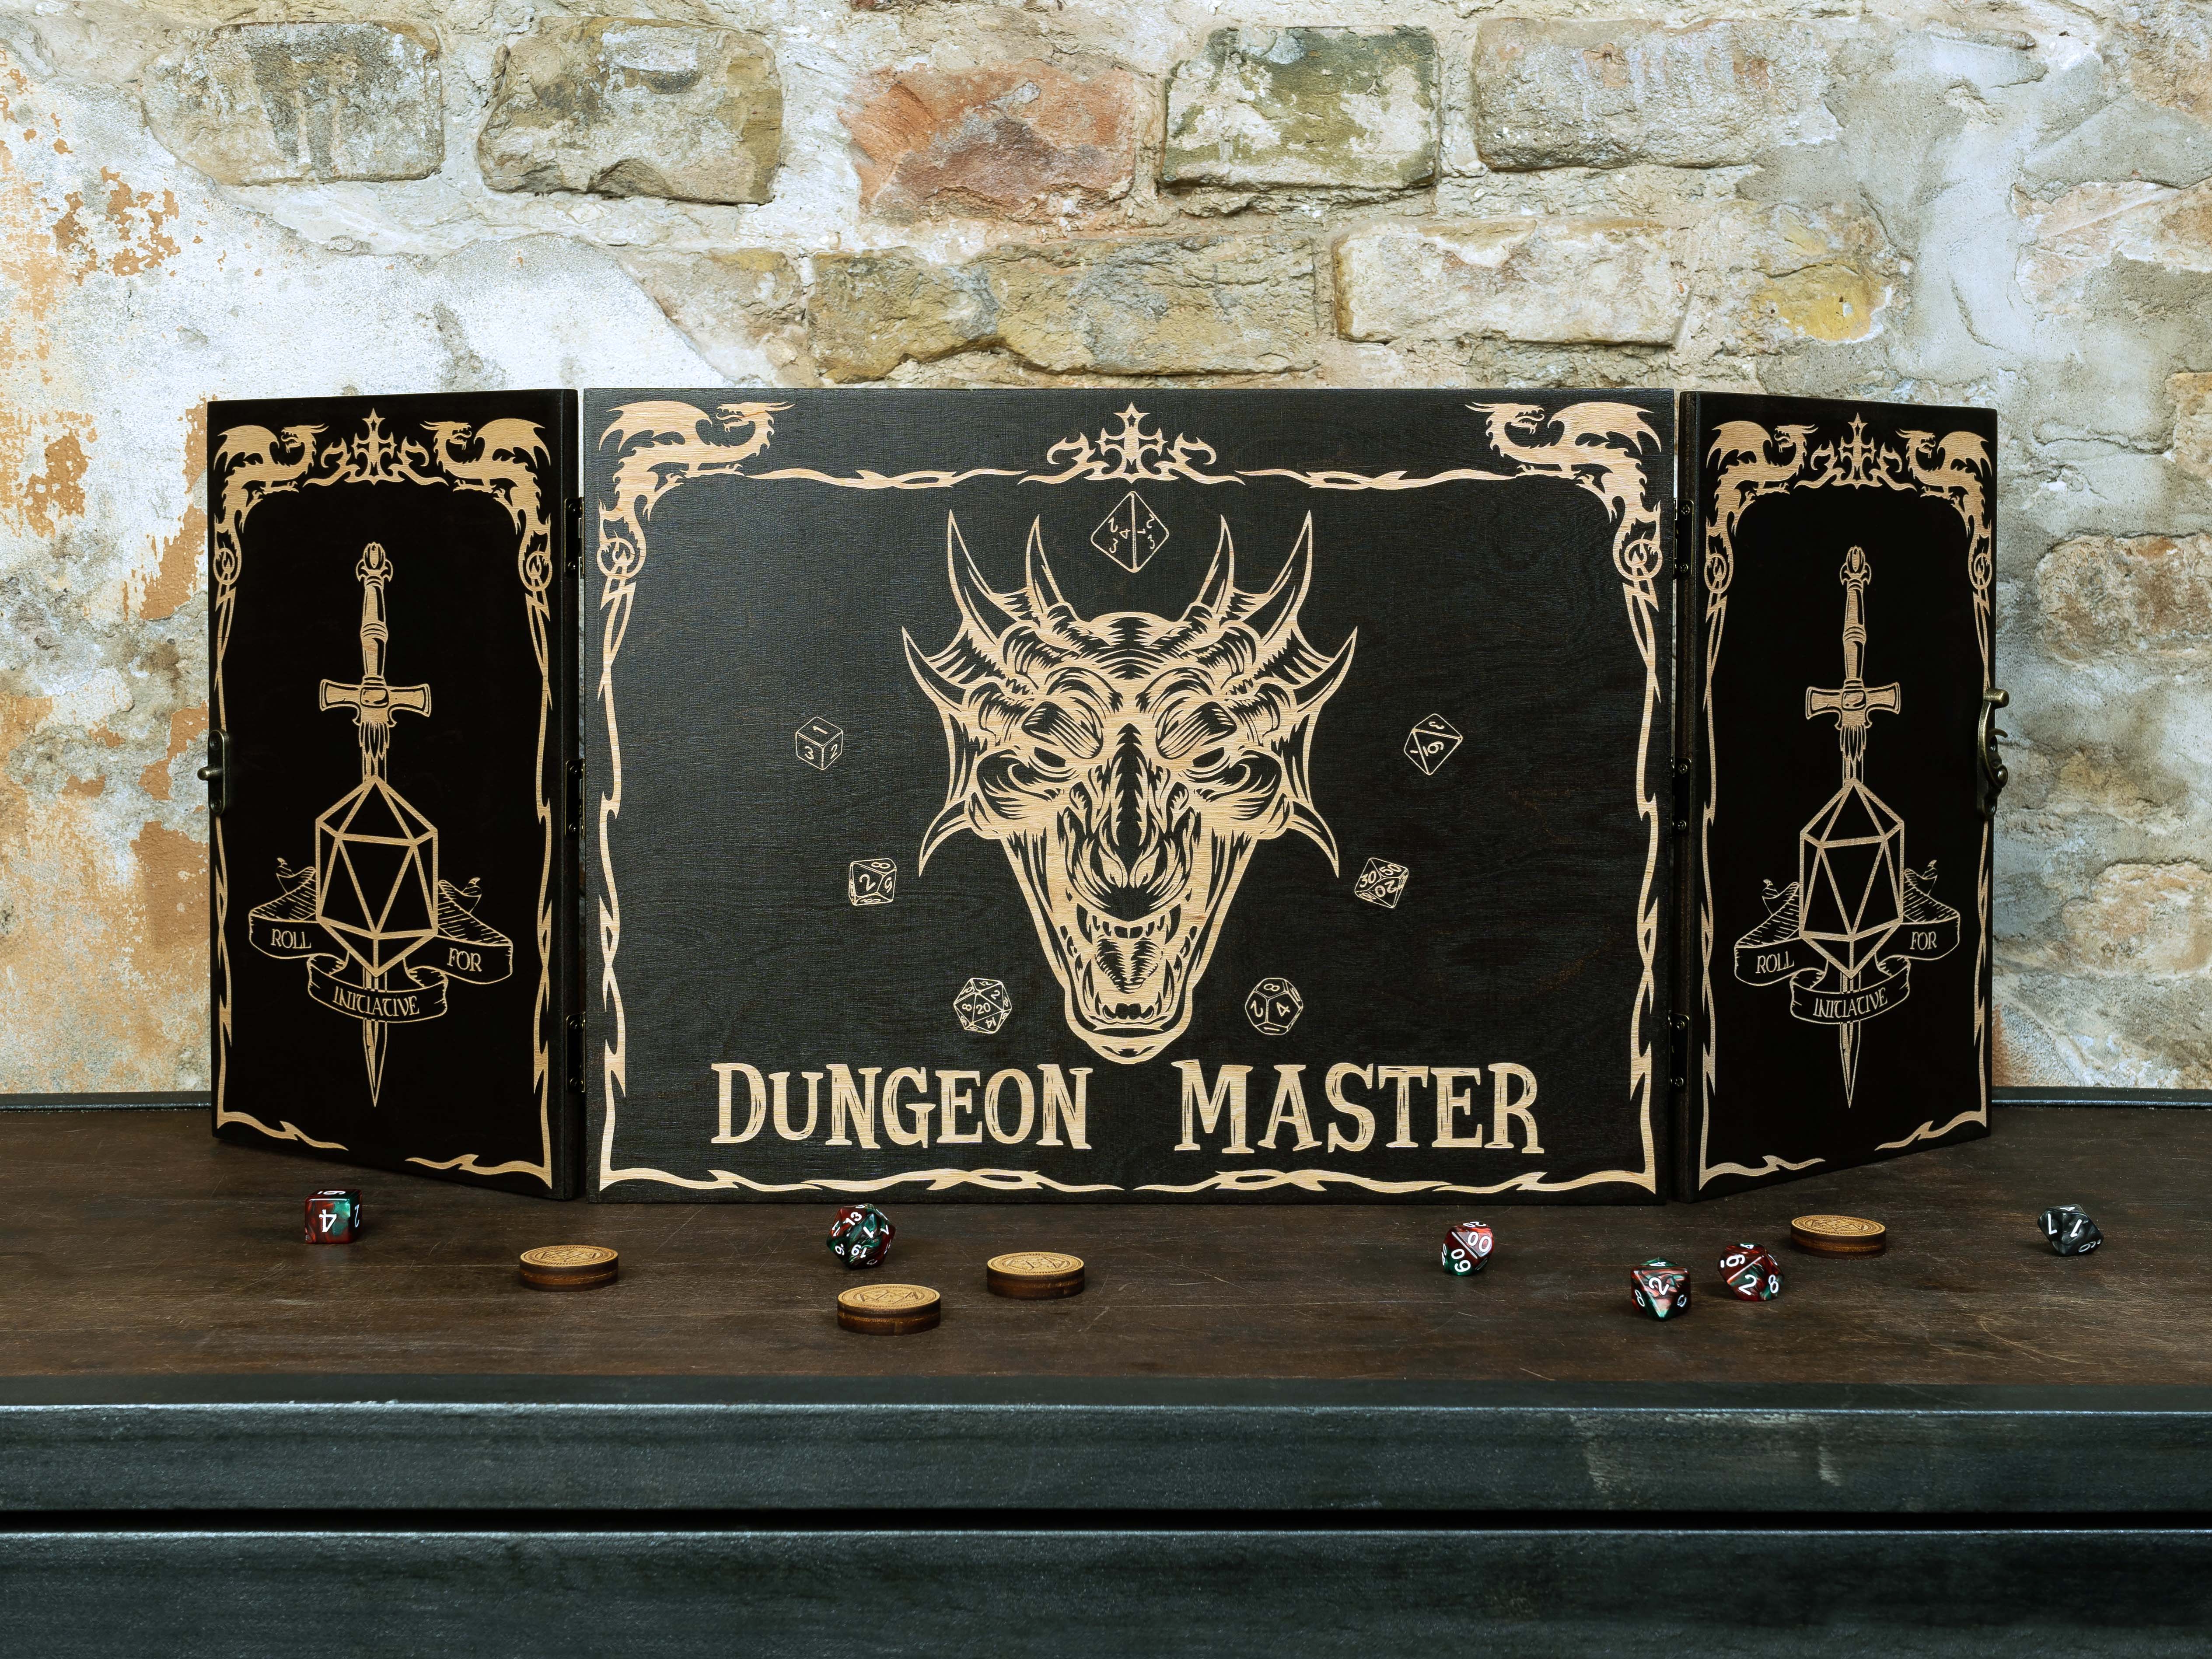 Dungeon Master screen wood Dragon with magnets, Dungeon master screens - GravisCup